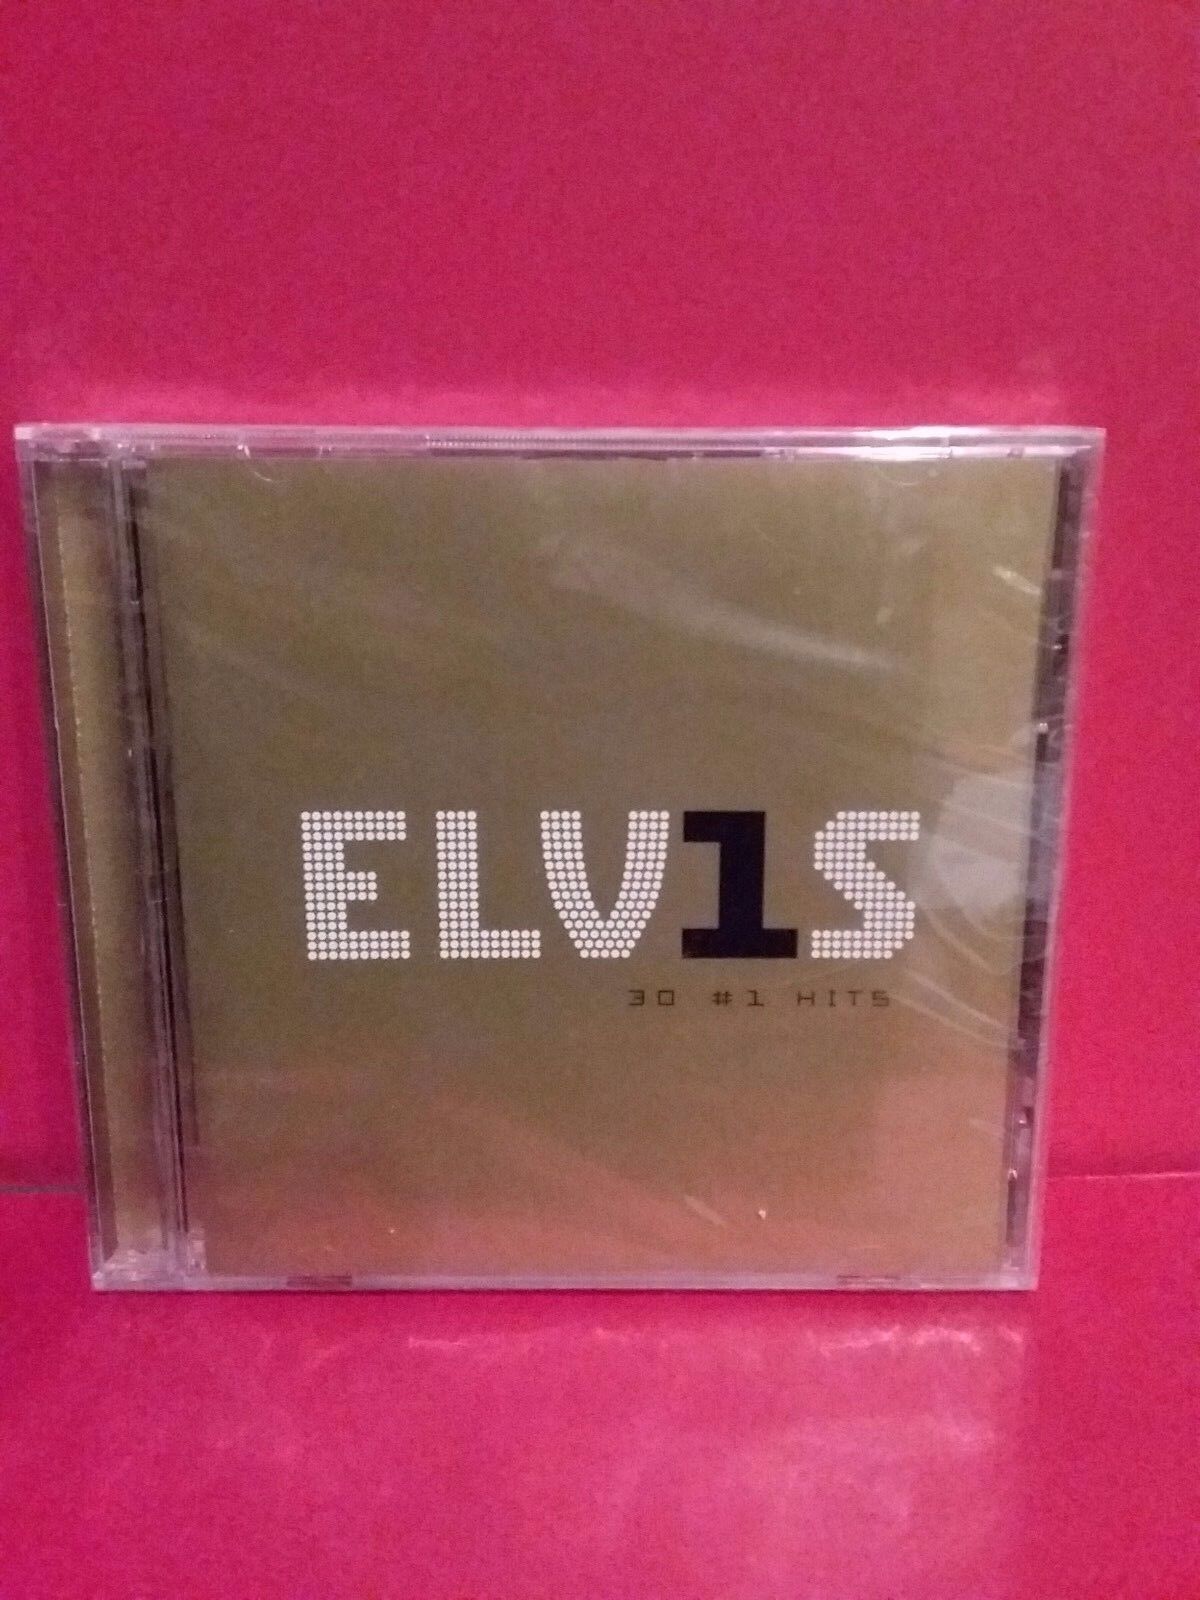 CD Elvis 30 1 Hits  New and sealed